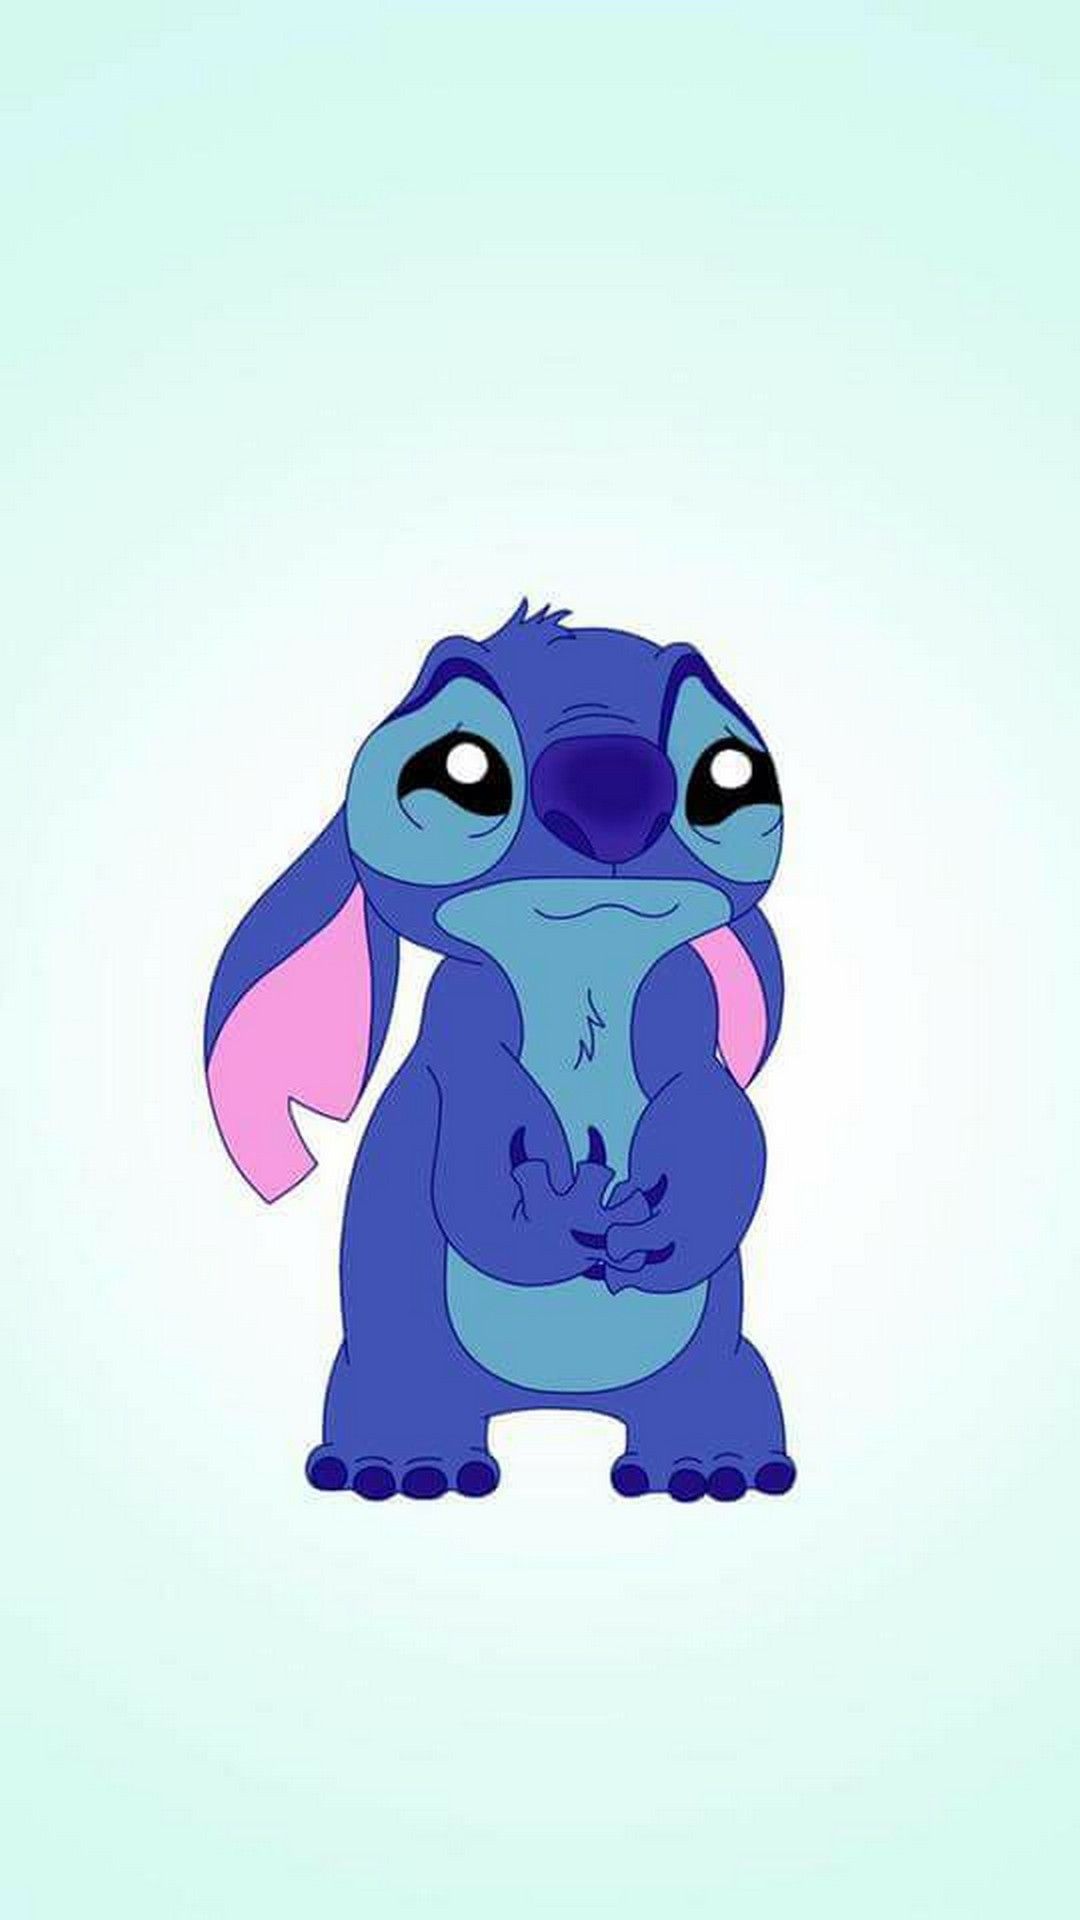 For lock screen dont touch my phone Stitch  By Stitch Lover page   Facebook